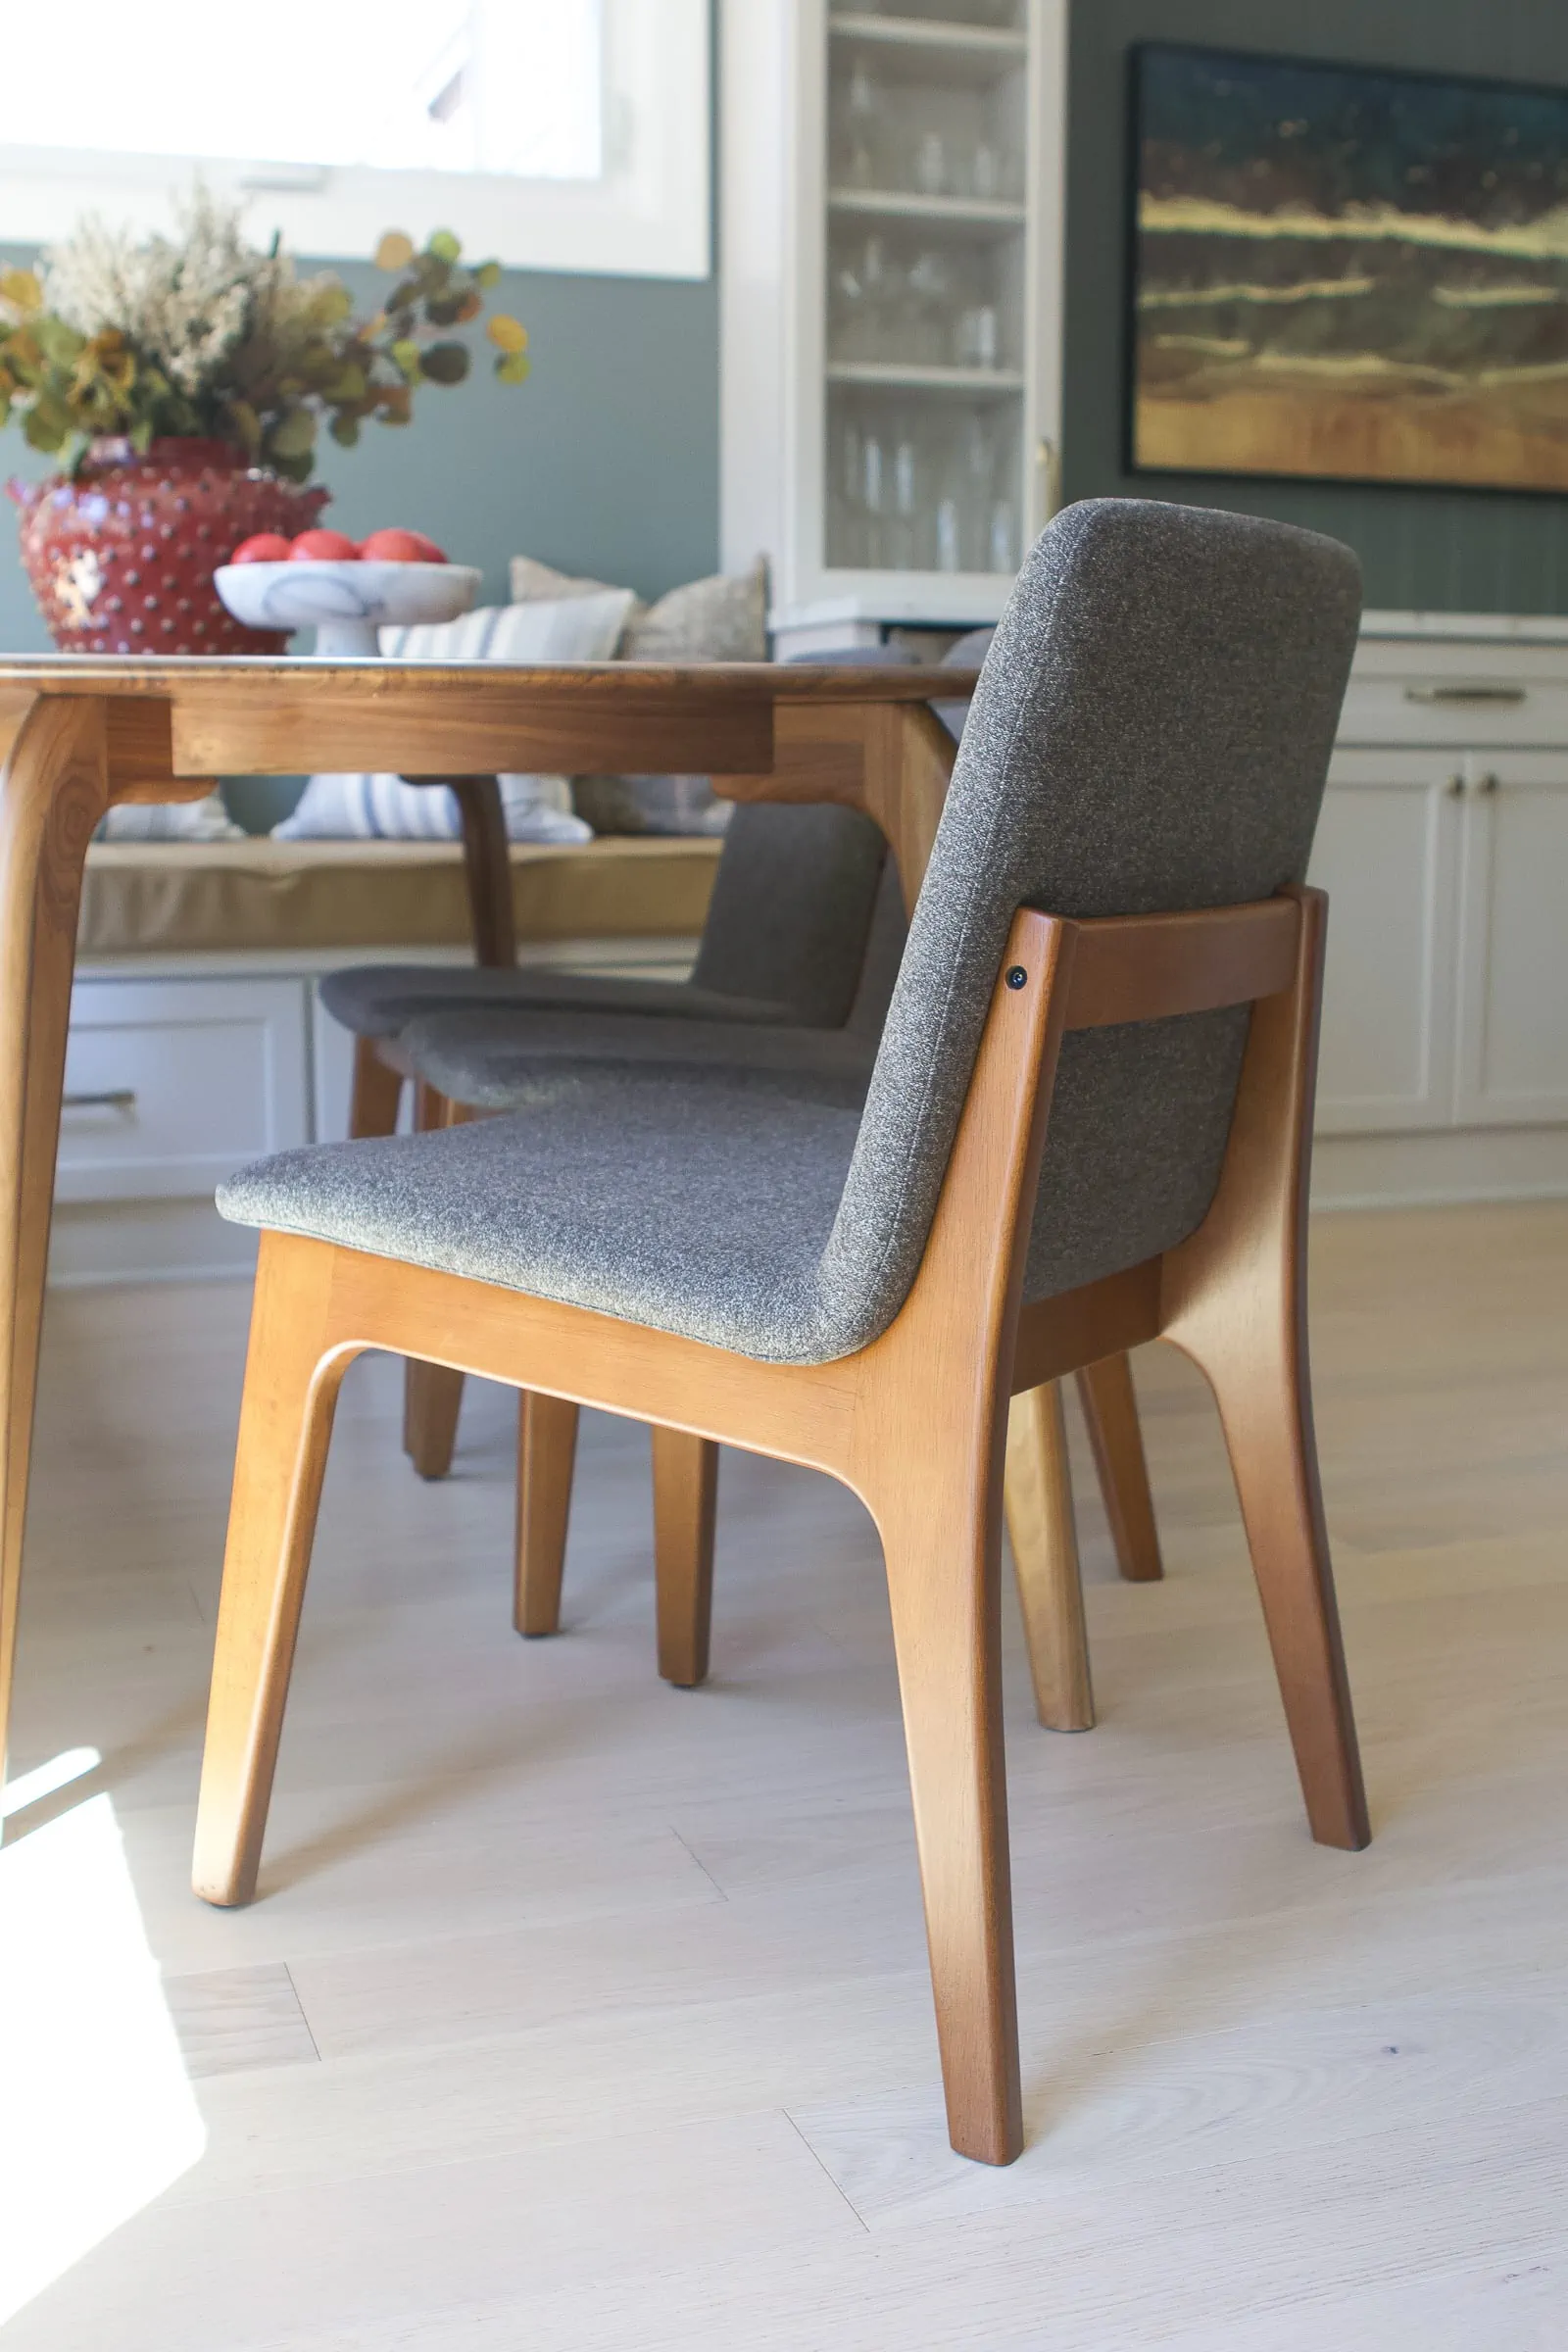 Reviewing my dining room chairs